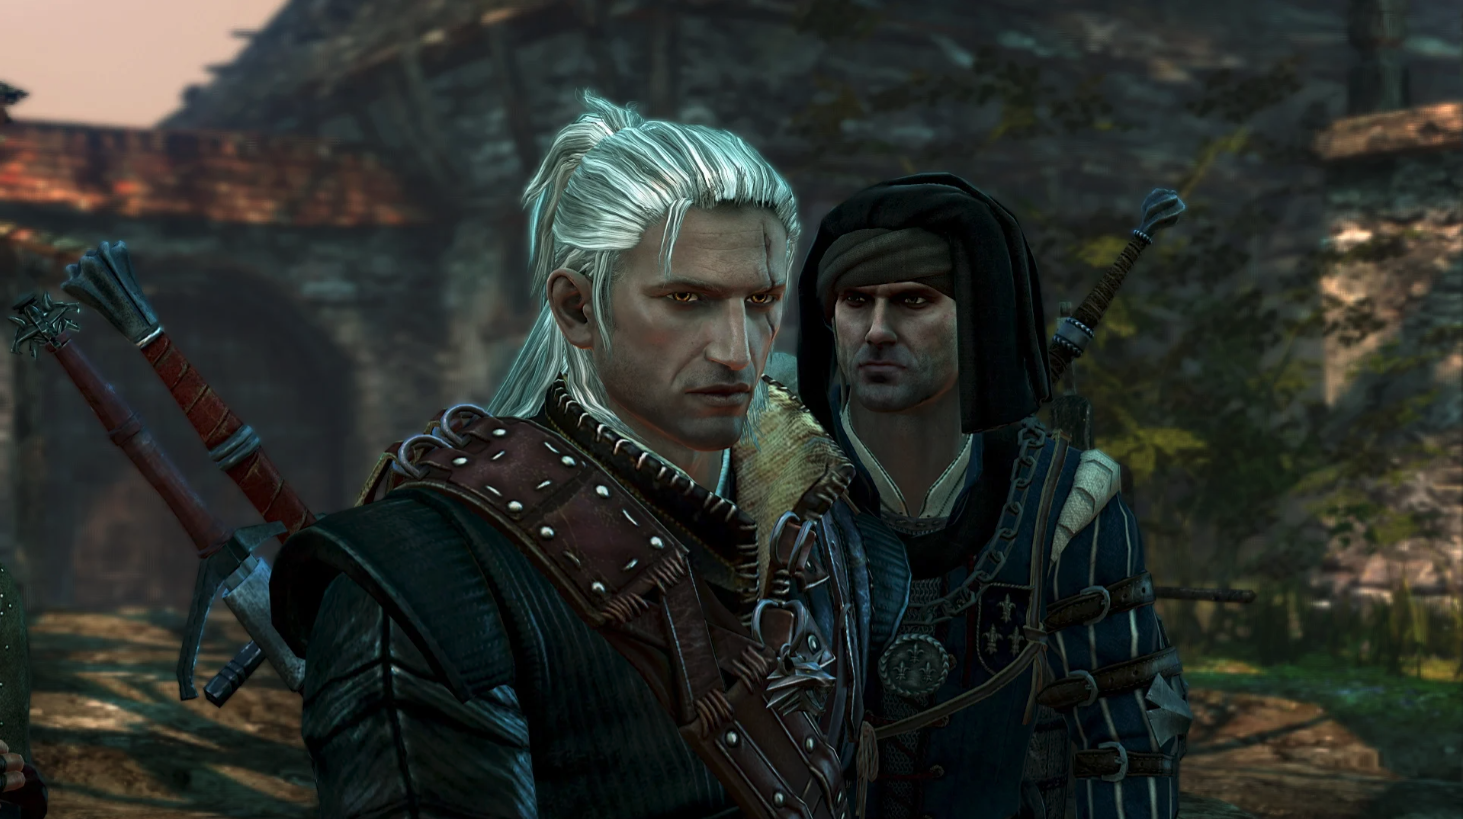 video games based on books - The Witcher video game screenshot